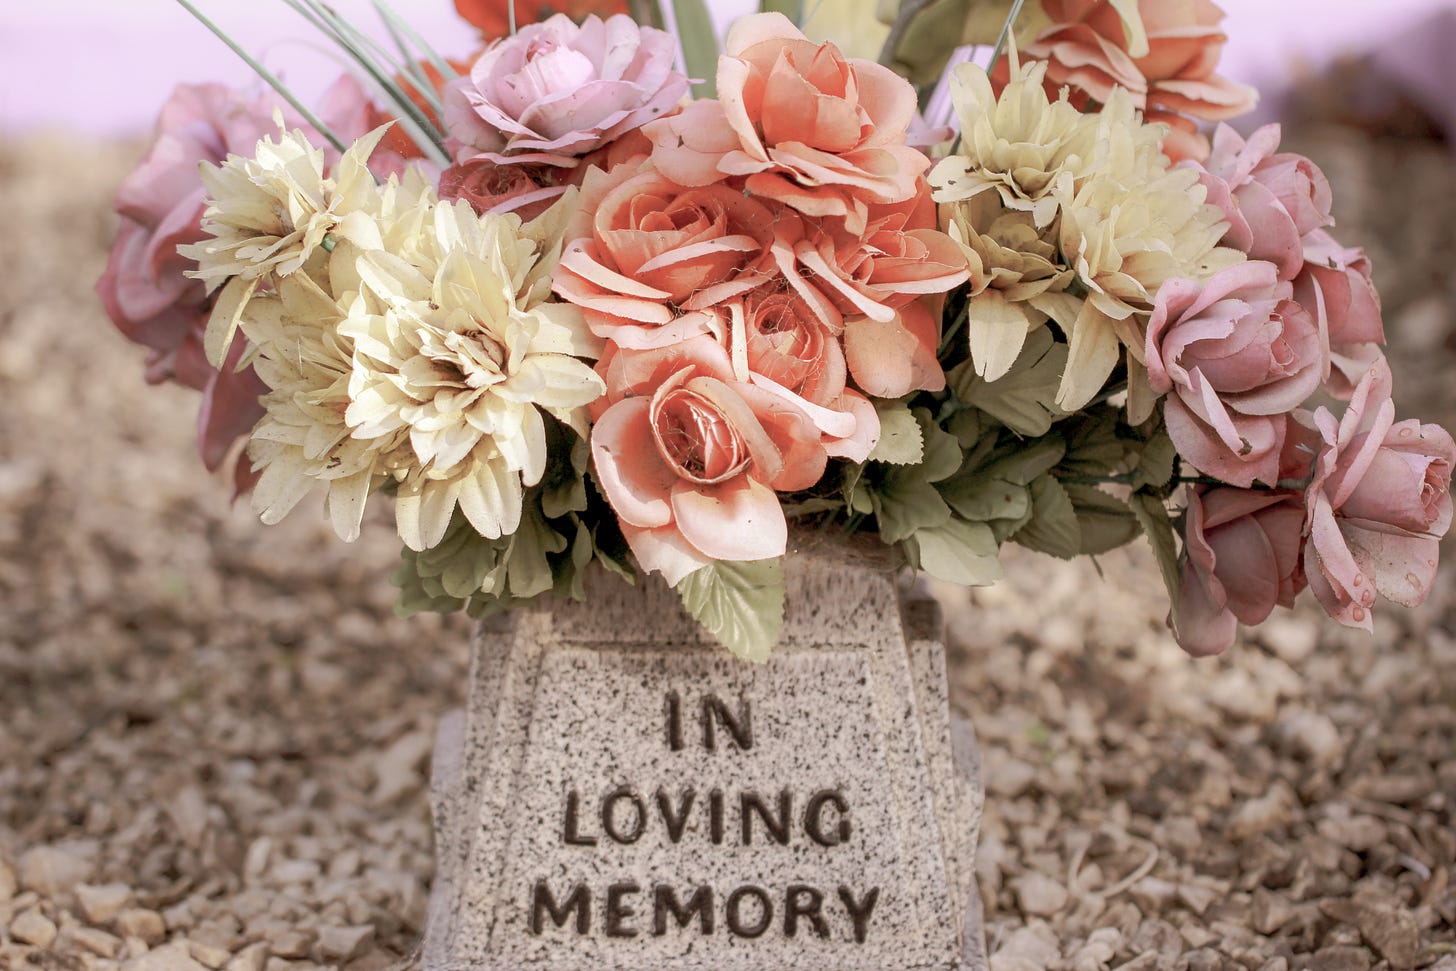 A bouquet of pastel-coloured flowers in a pot that reads 'In loving memory'.